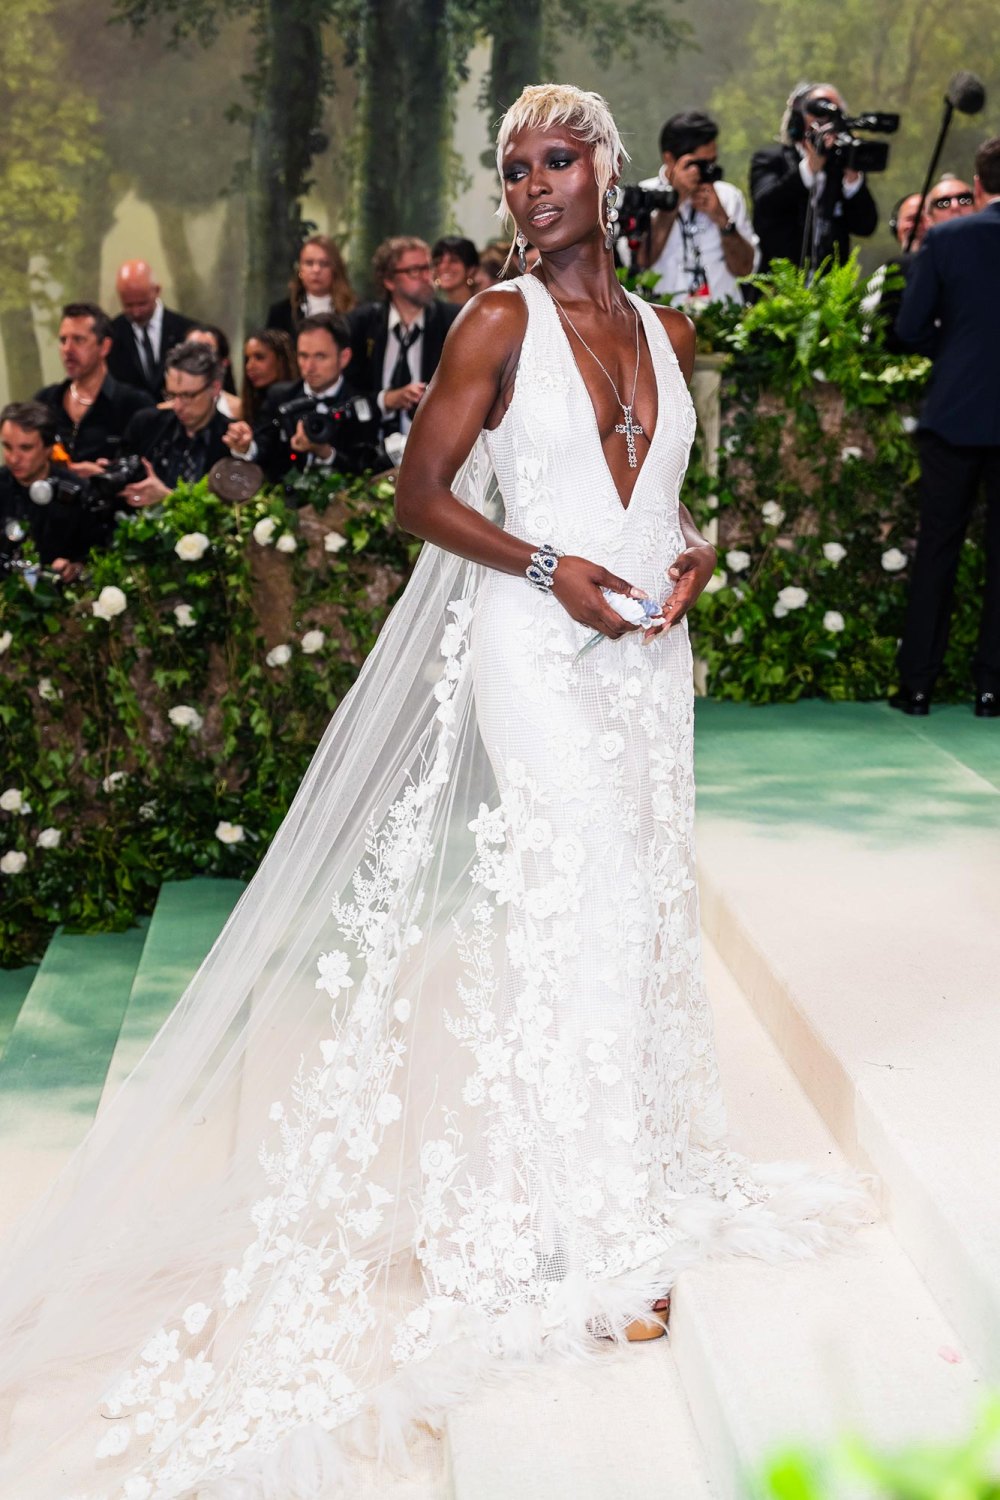 Why Jodie Turner Smith Wore a Deliberately Bridal Gown to Met Gala After Joshua Jackson Divorce 877